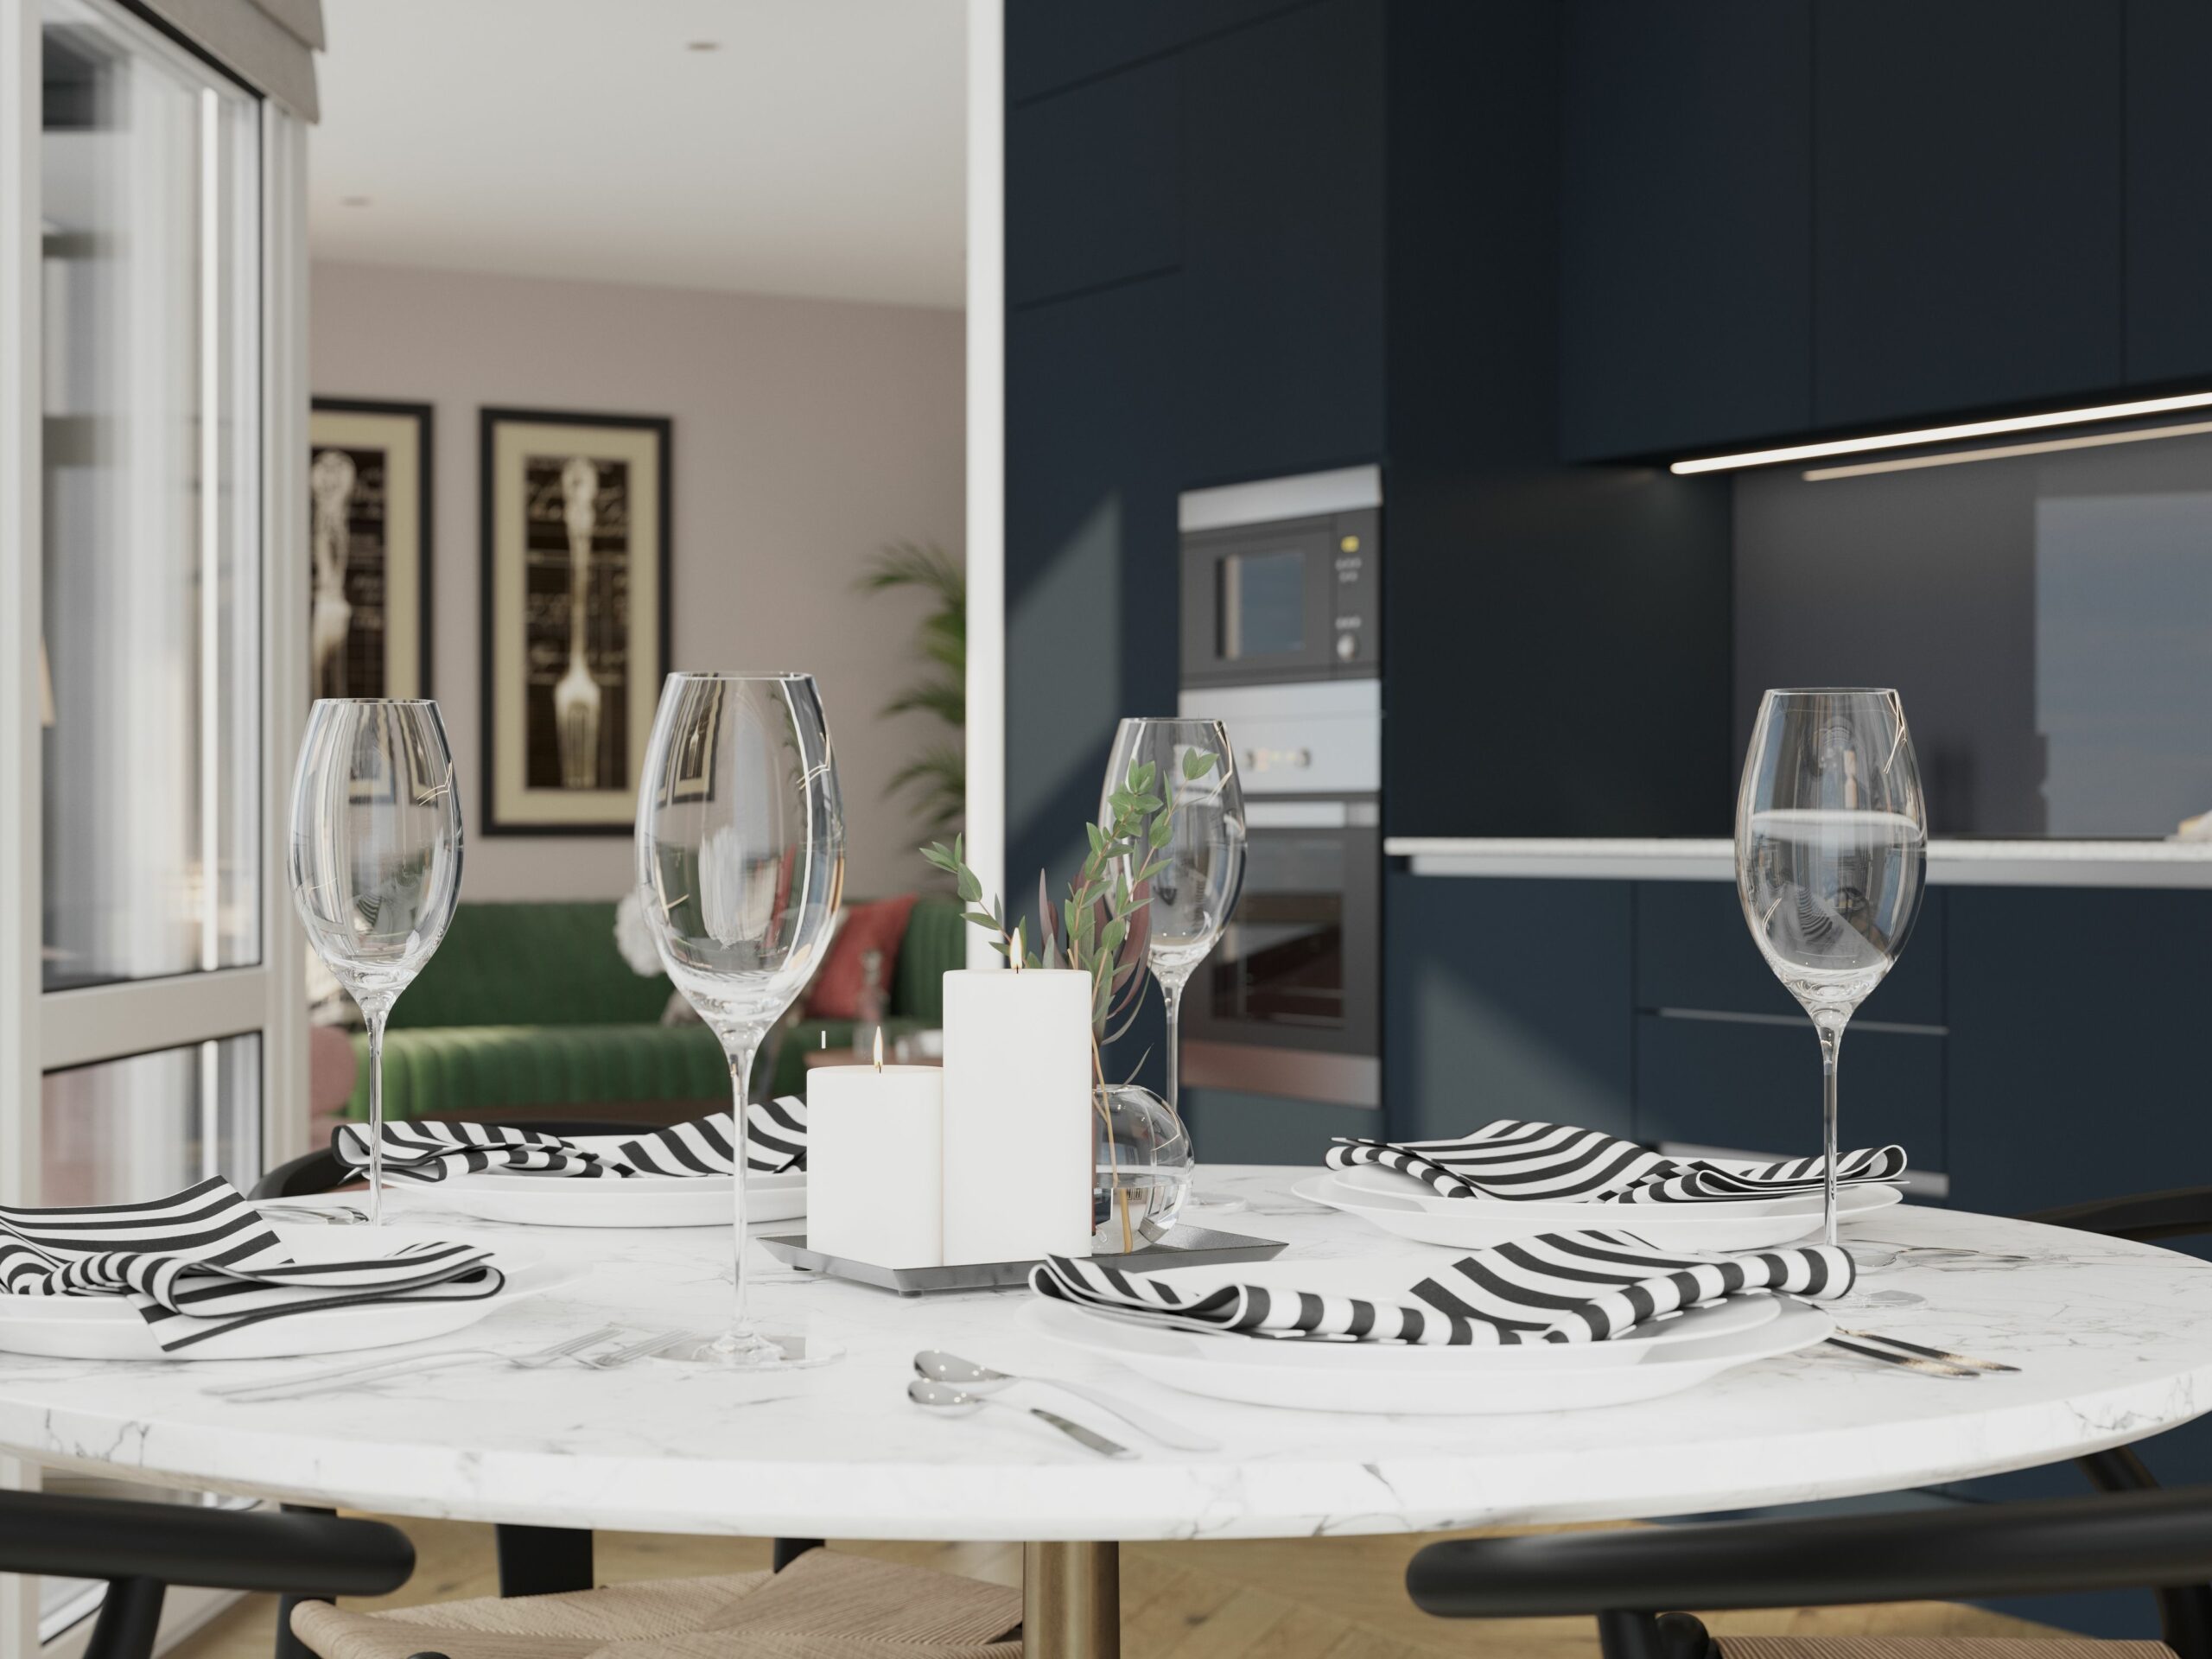 cameo interior kitchen living space 3d cgi greater london visualisation